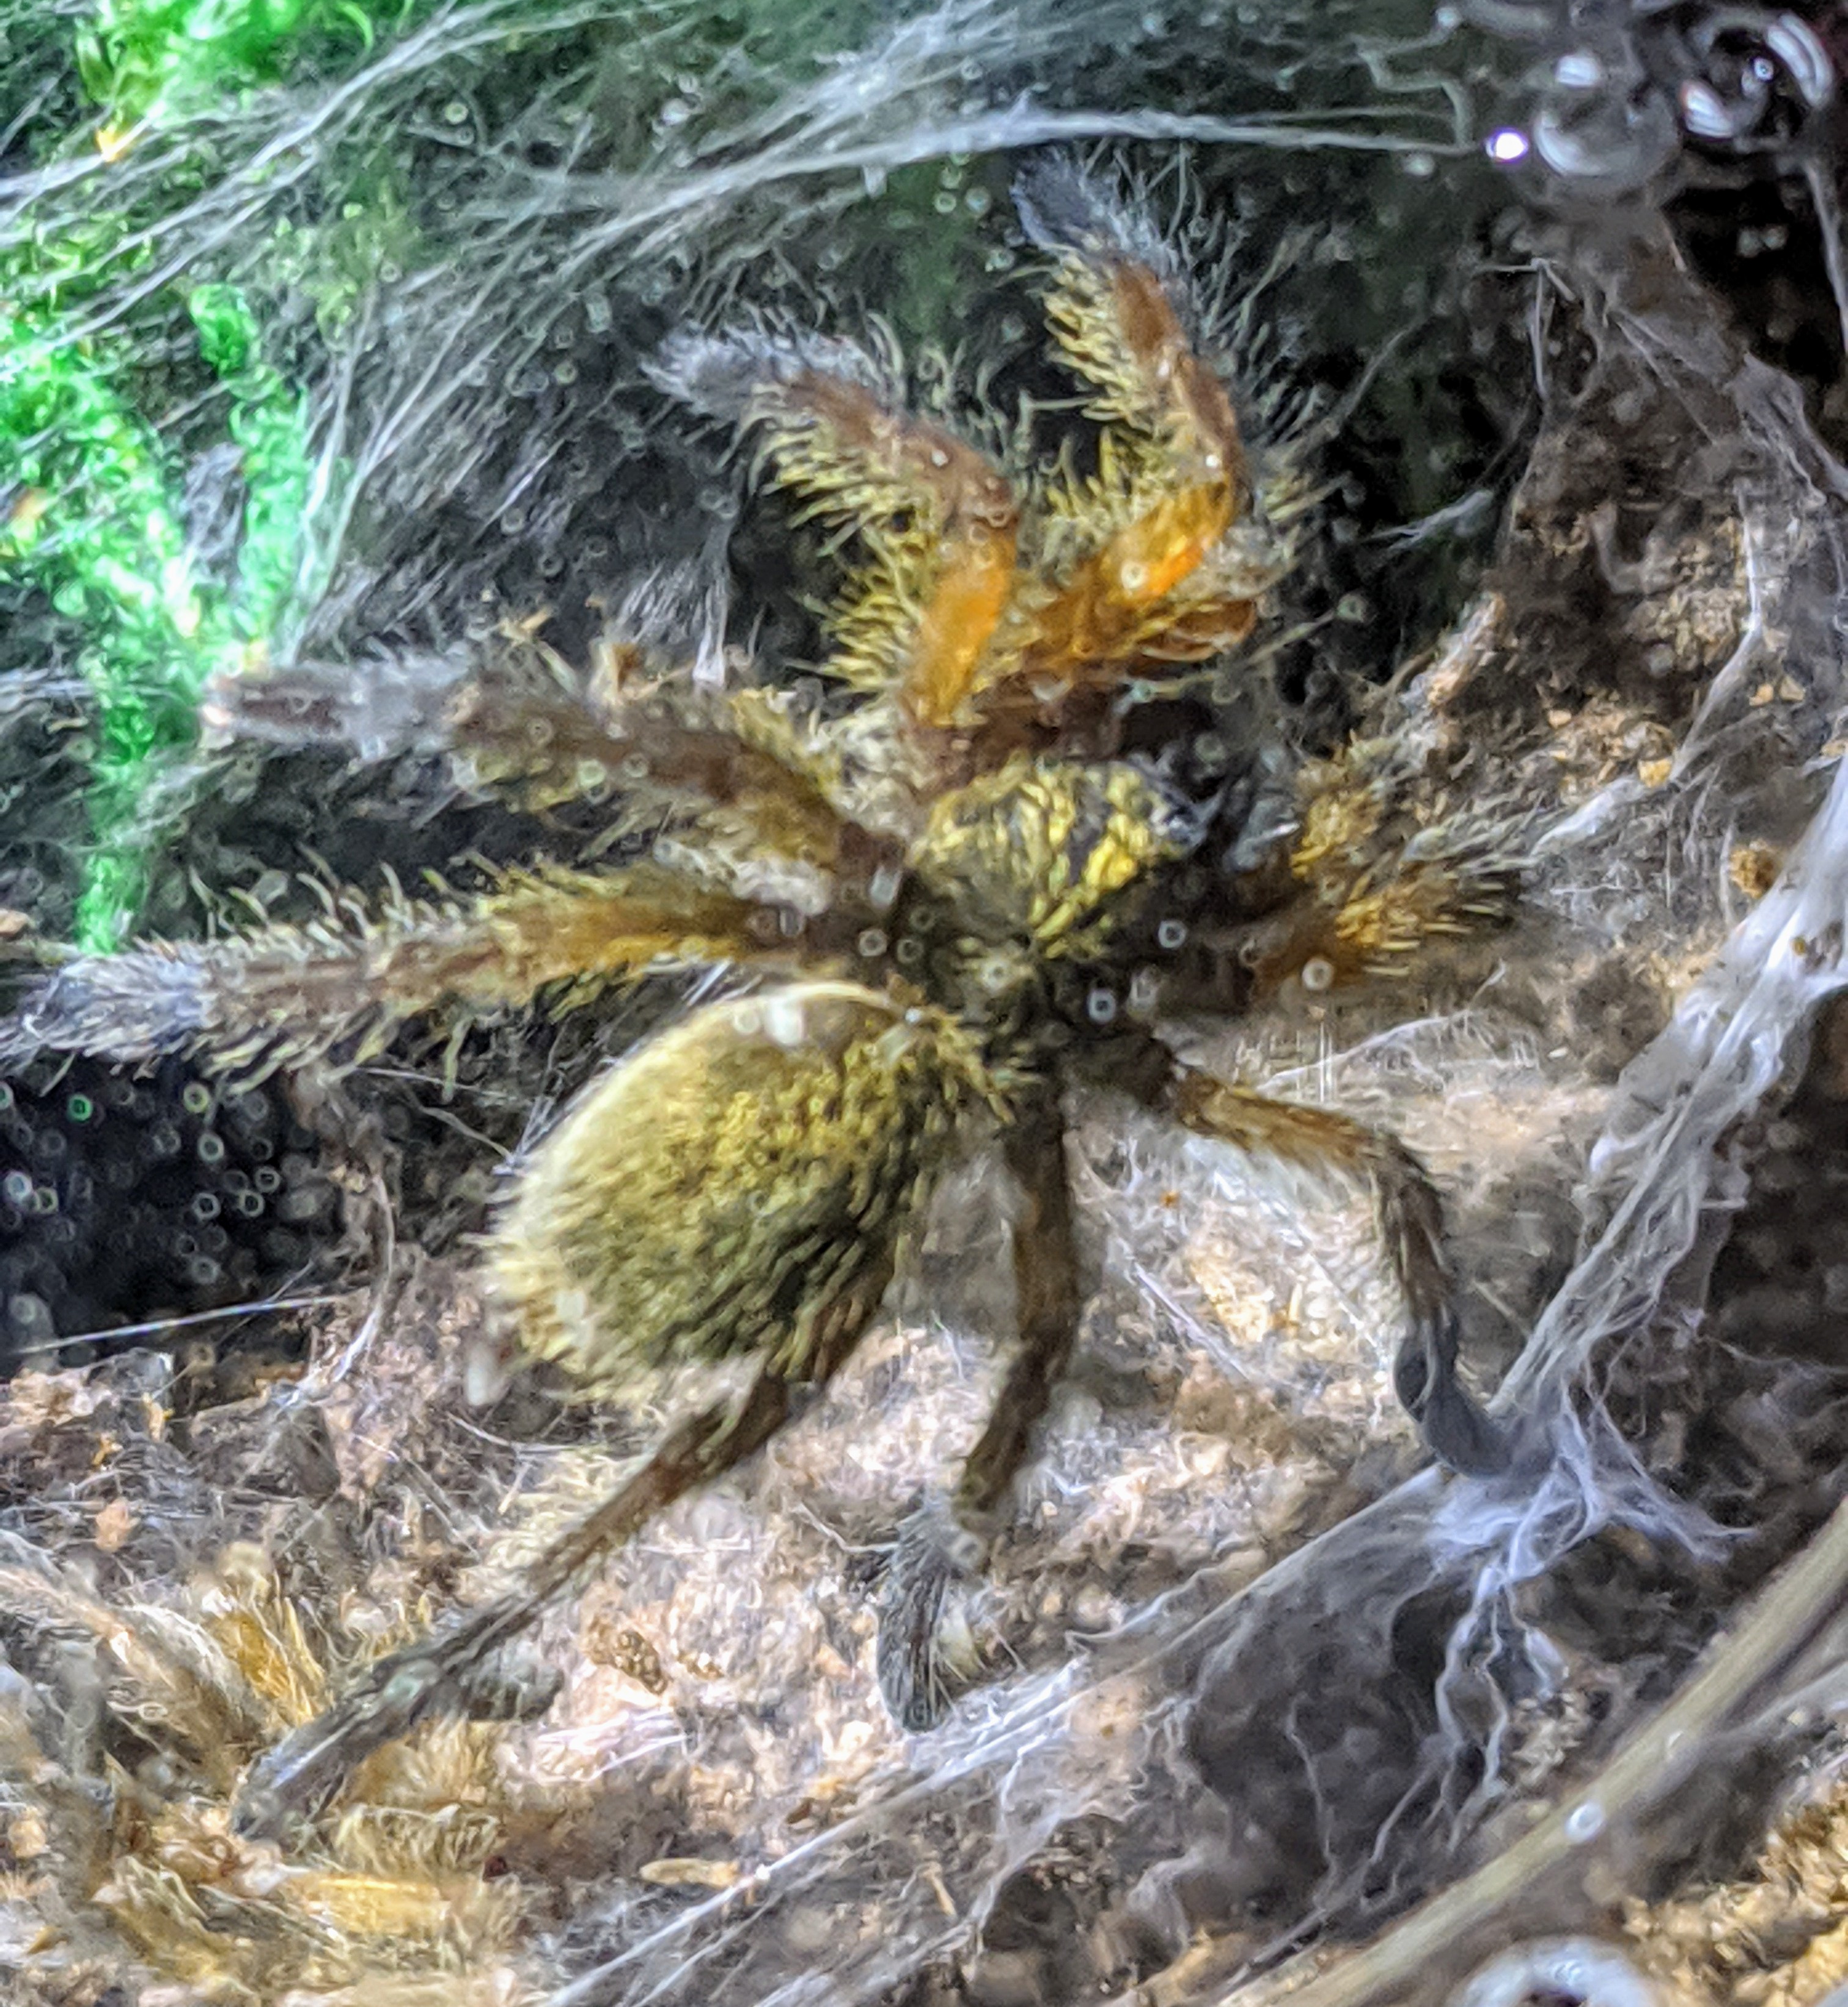 H. pulchripes sling #2